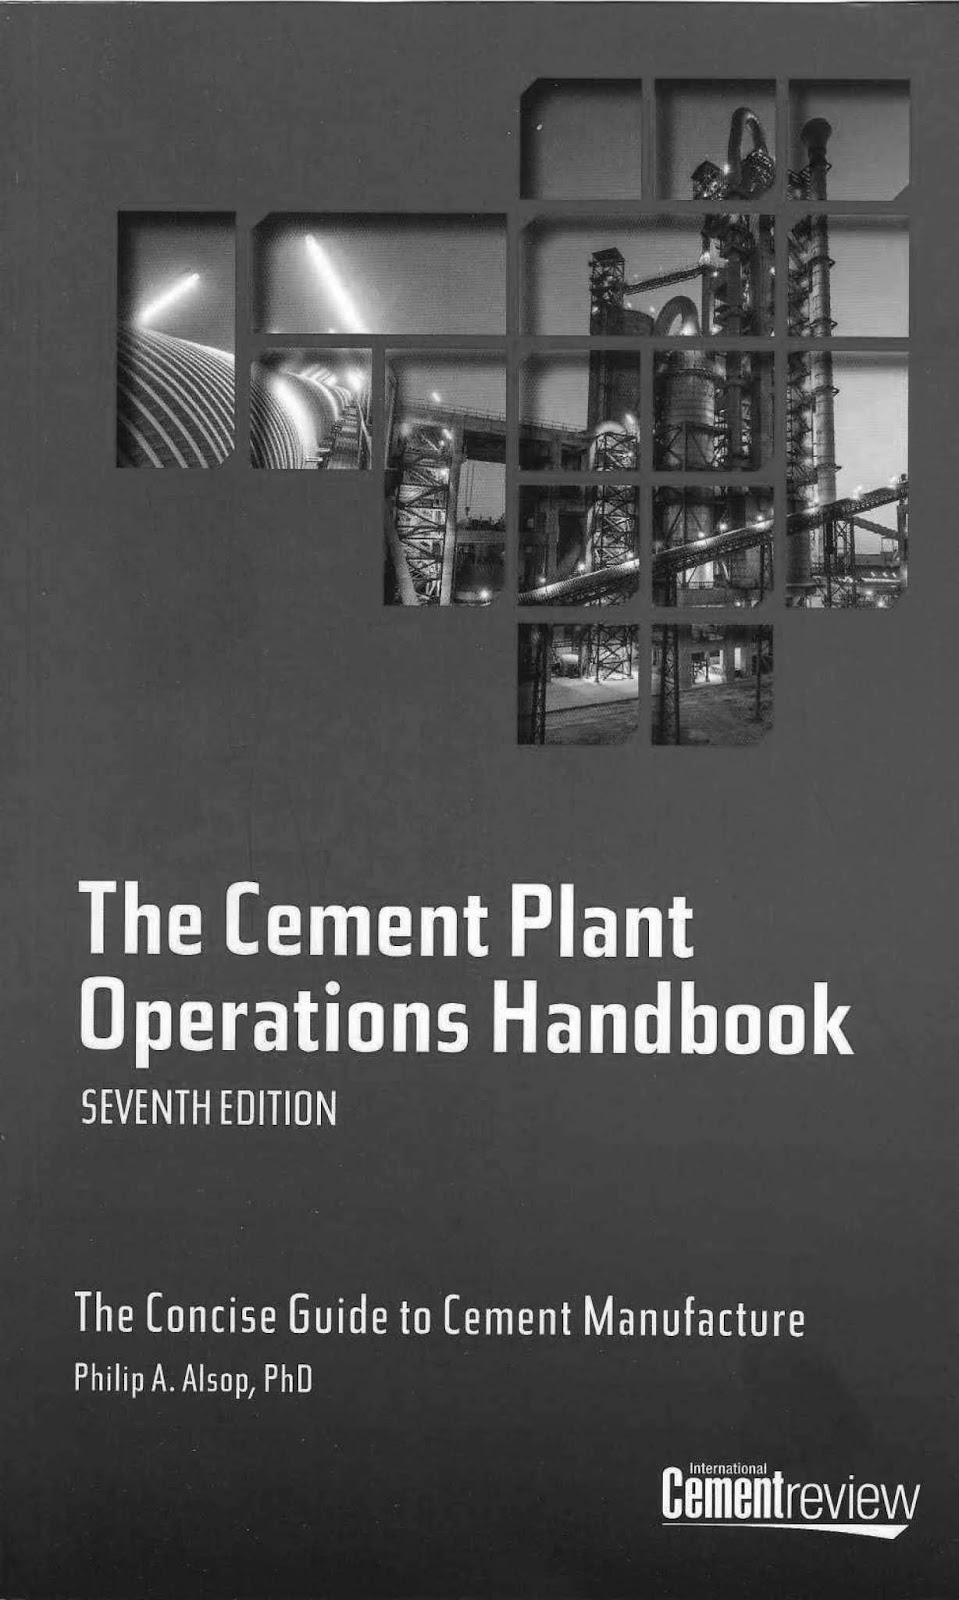 Engineering Library Ebooks: The Cement Plant Operations Handbook, 7th